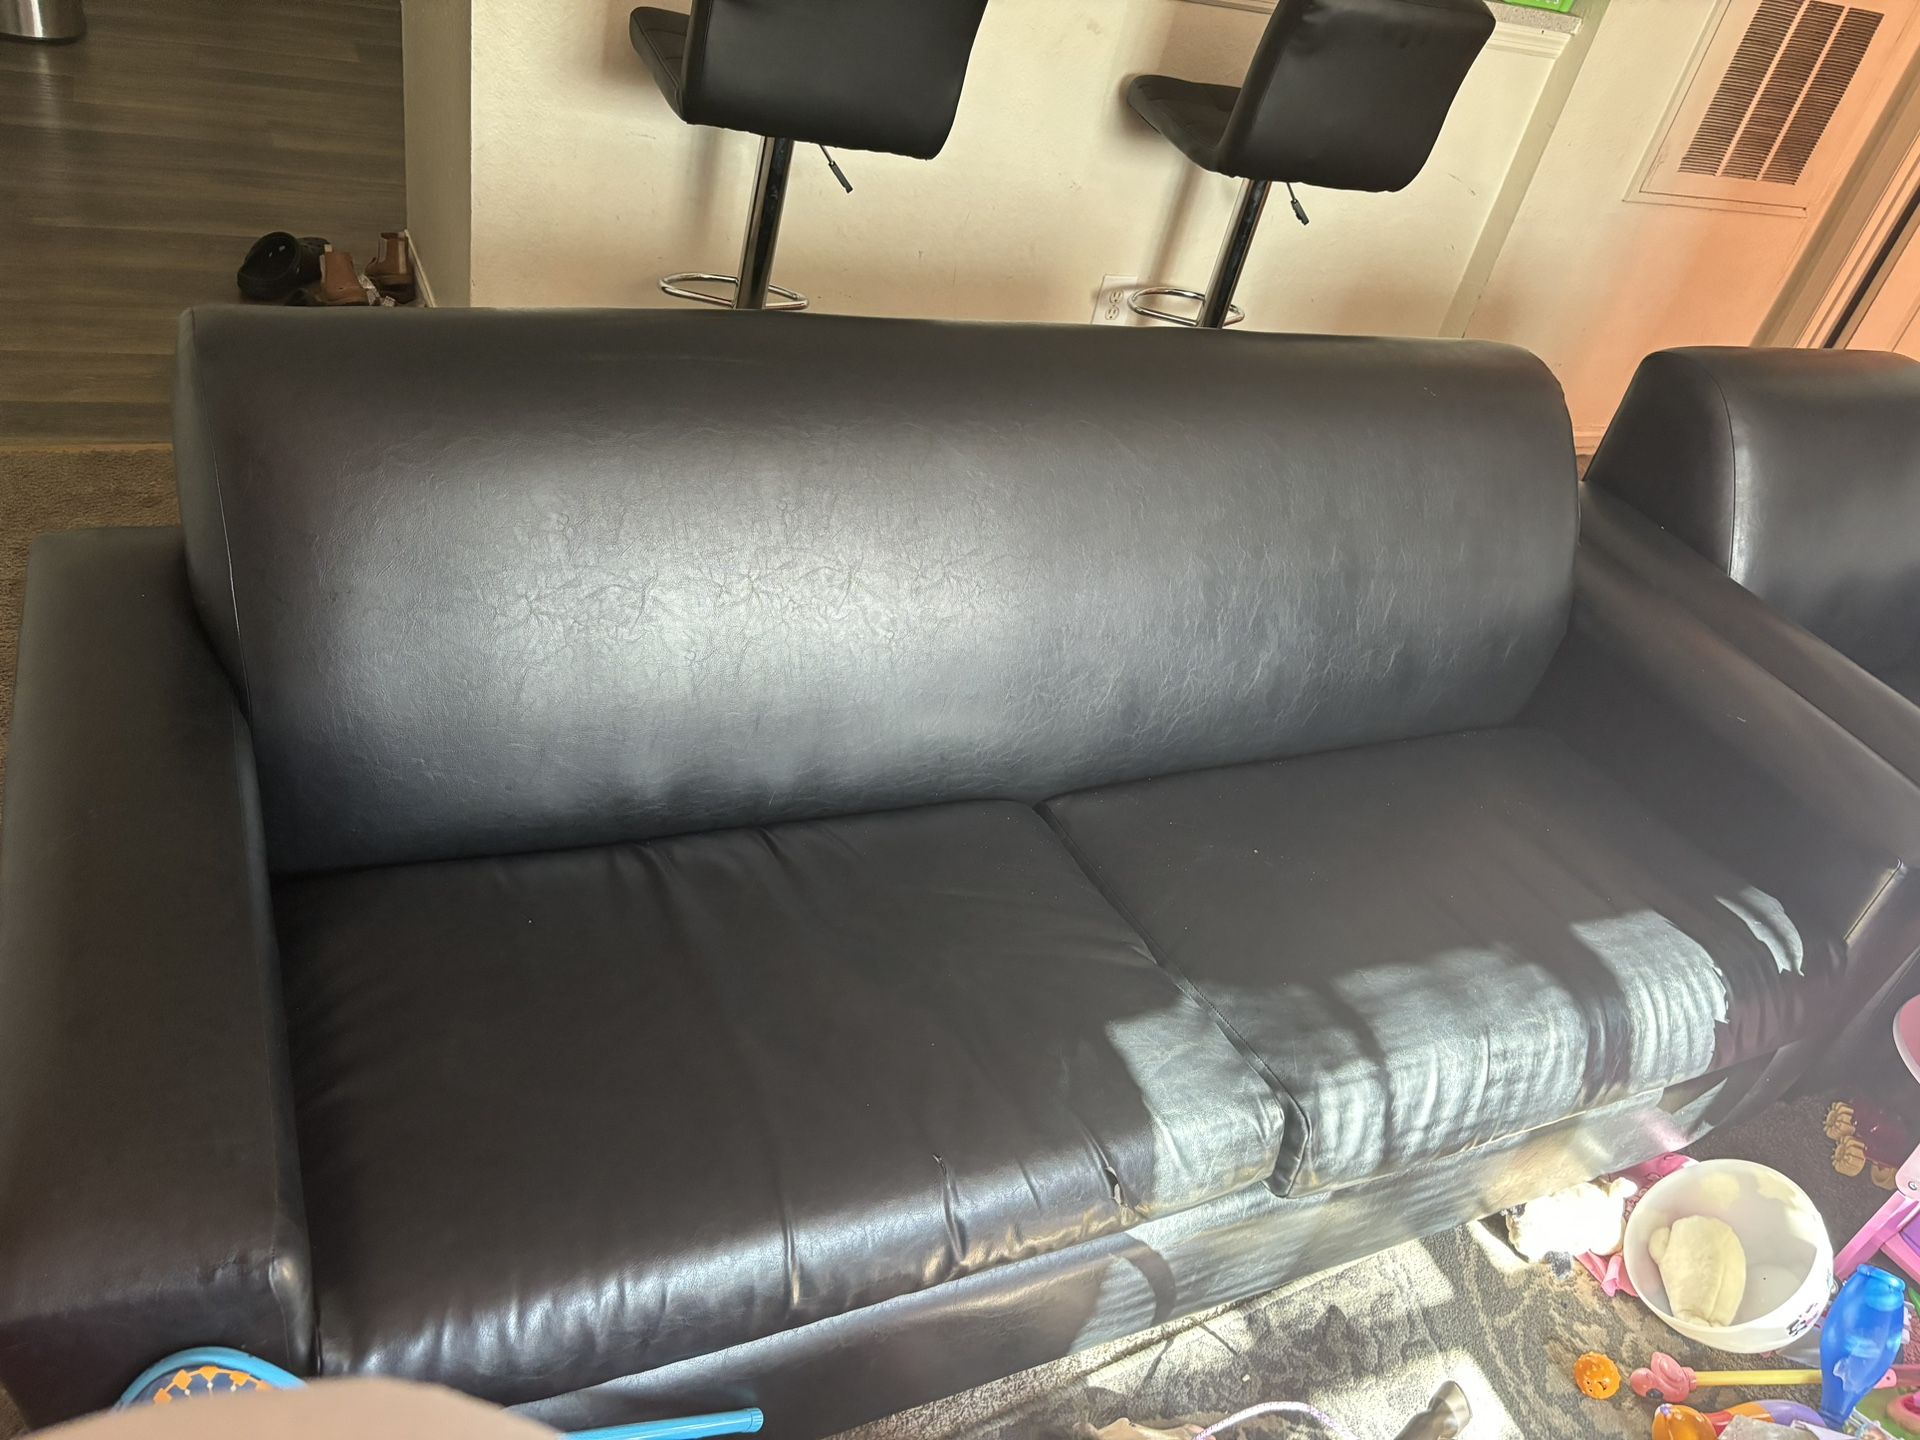 black couch and chair for sale